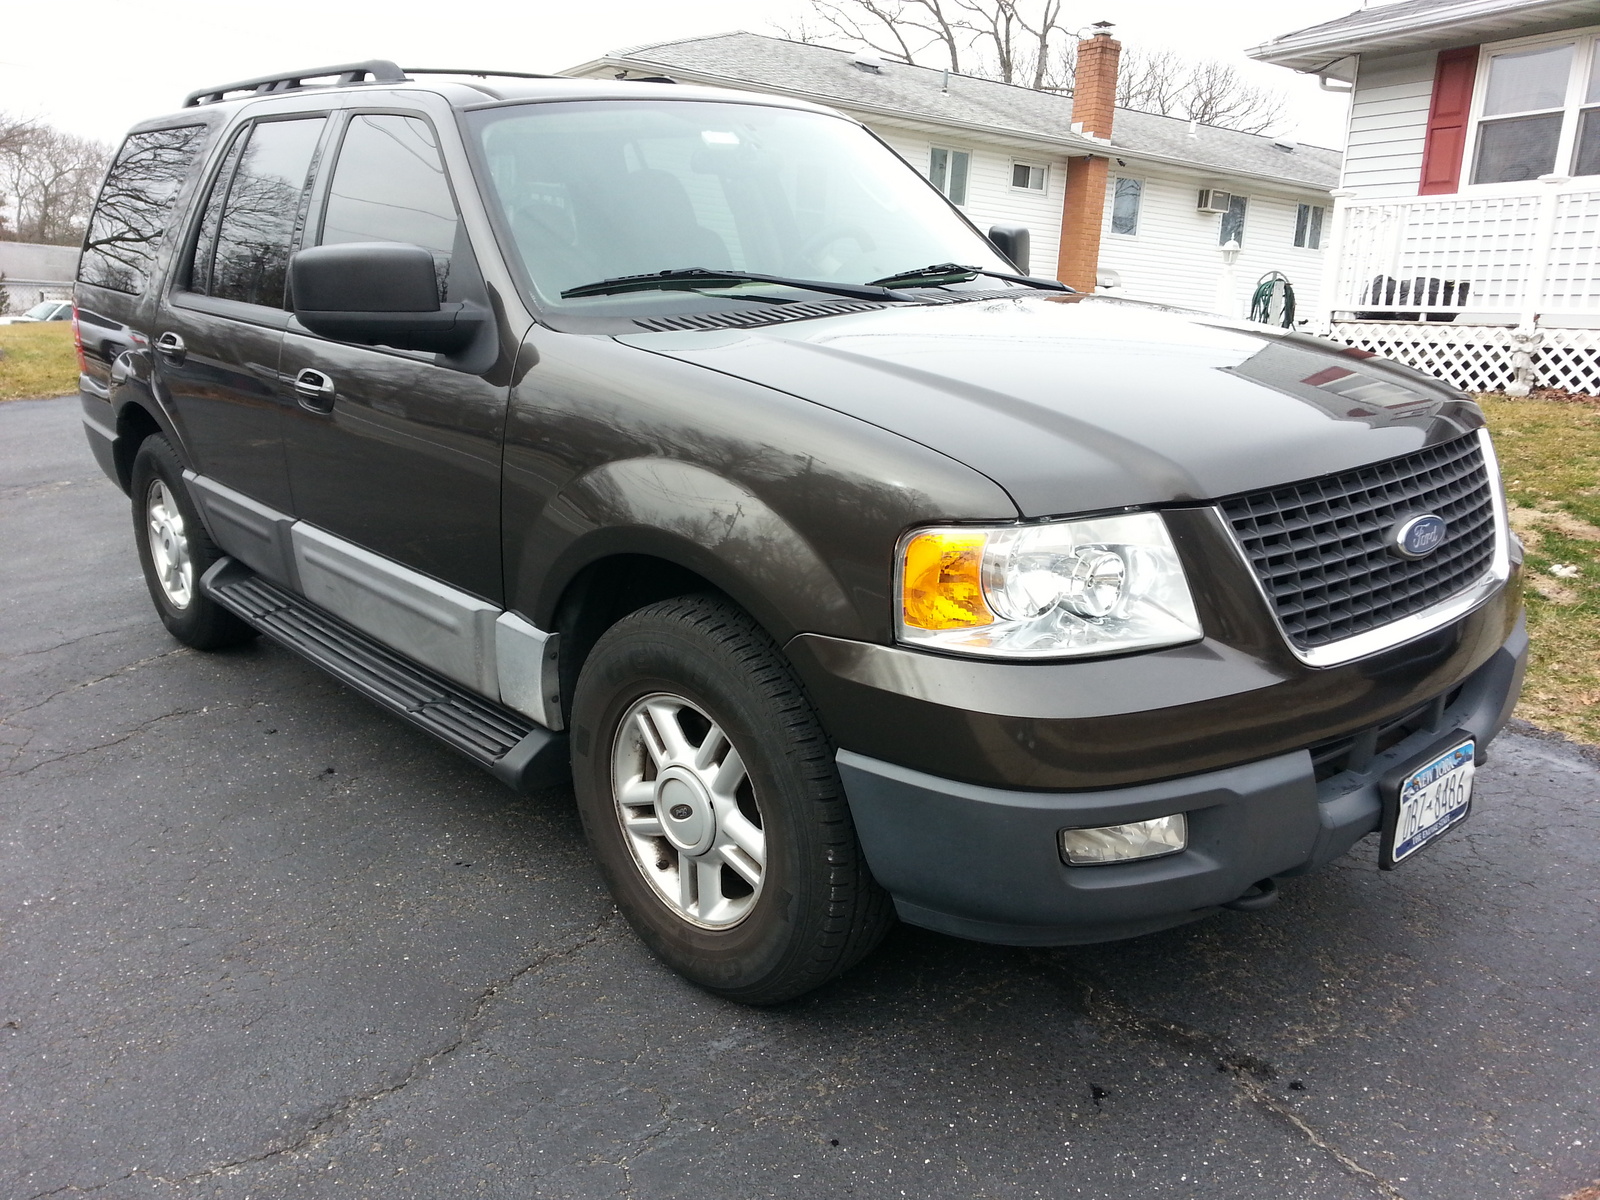 2005 Ford expedition 4wd vehicle weight #4